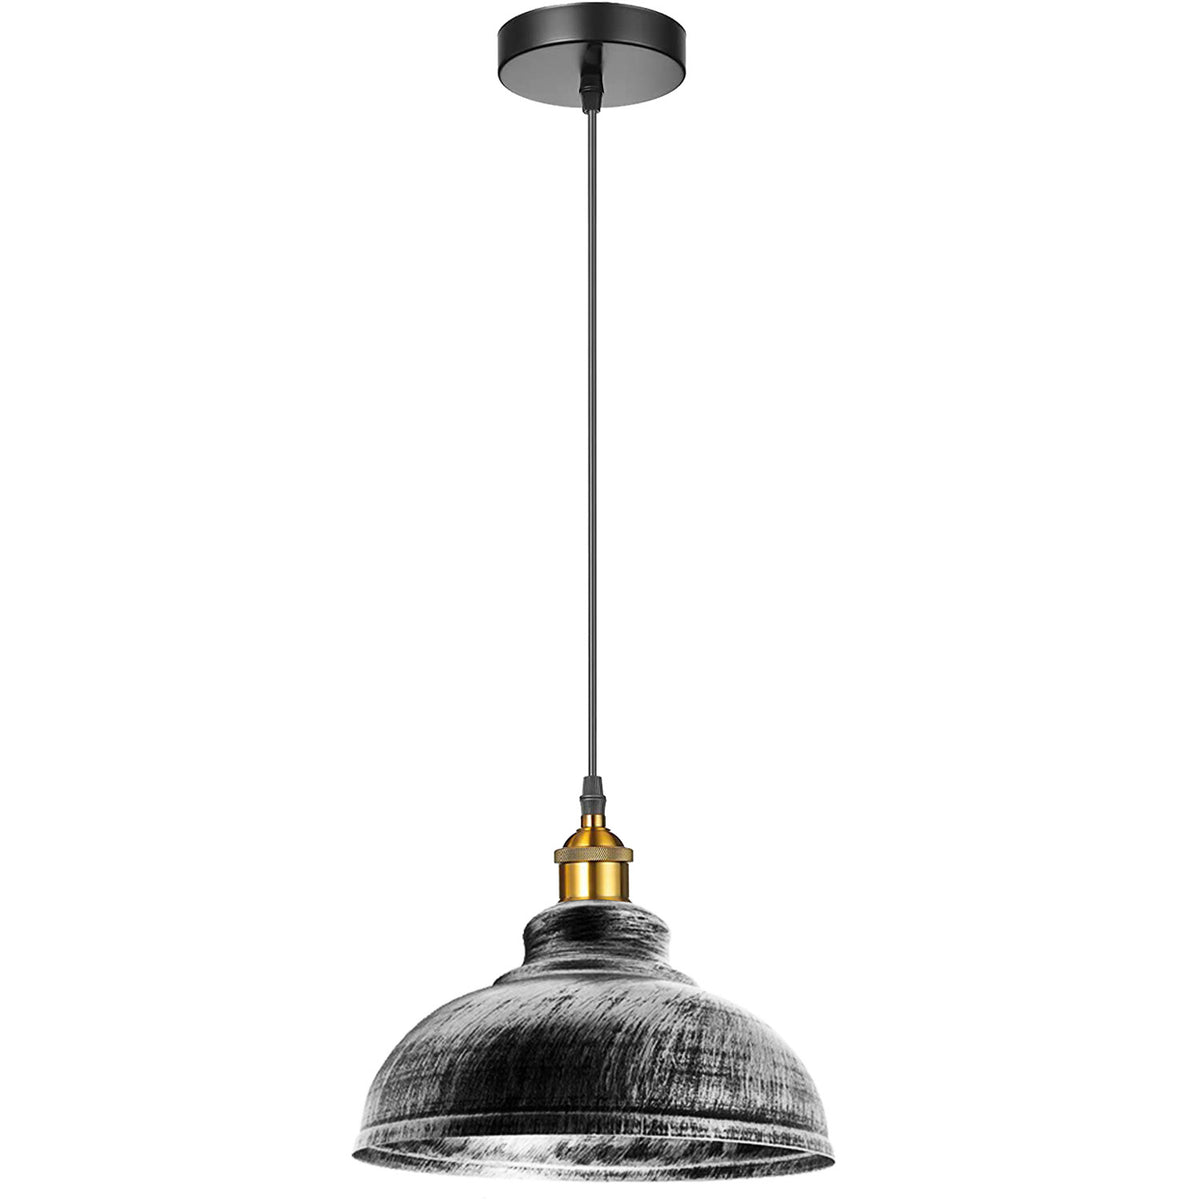 Dome lampshade industrial Vintage Retro Old Style pendant light Shade 